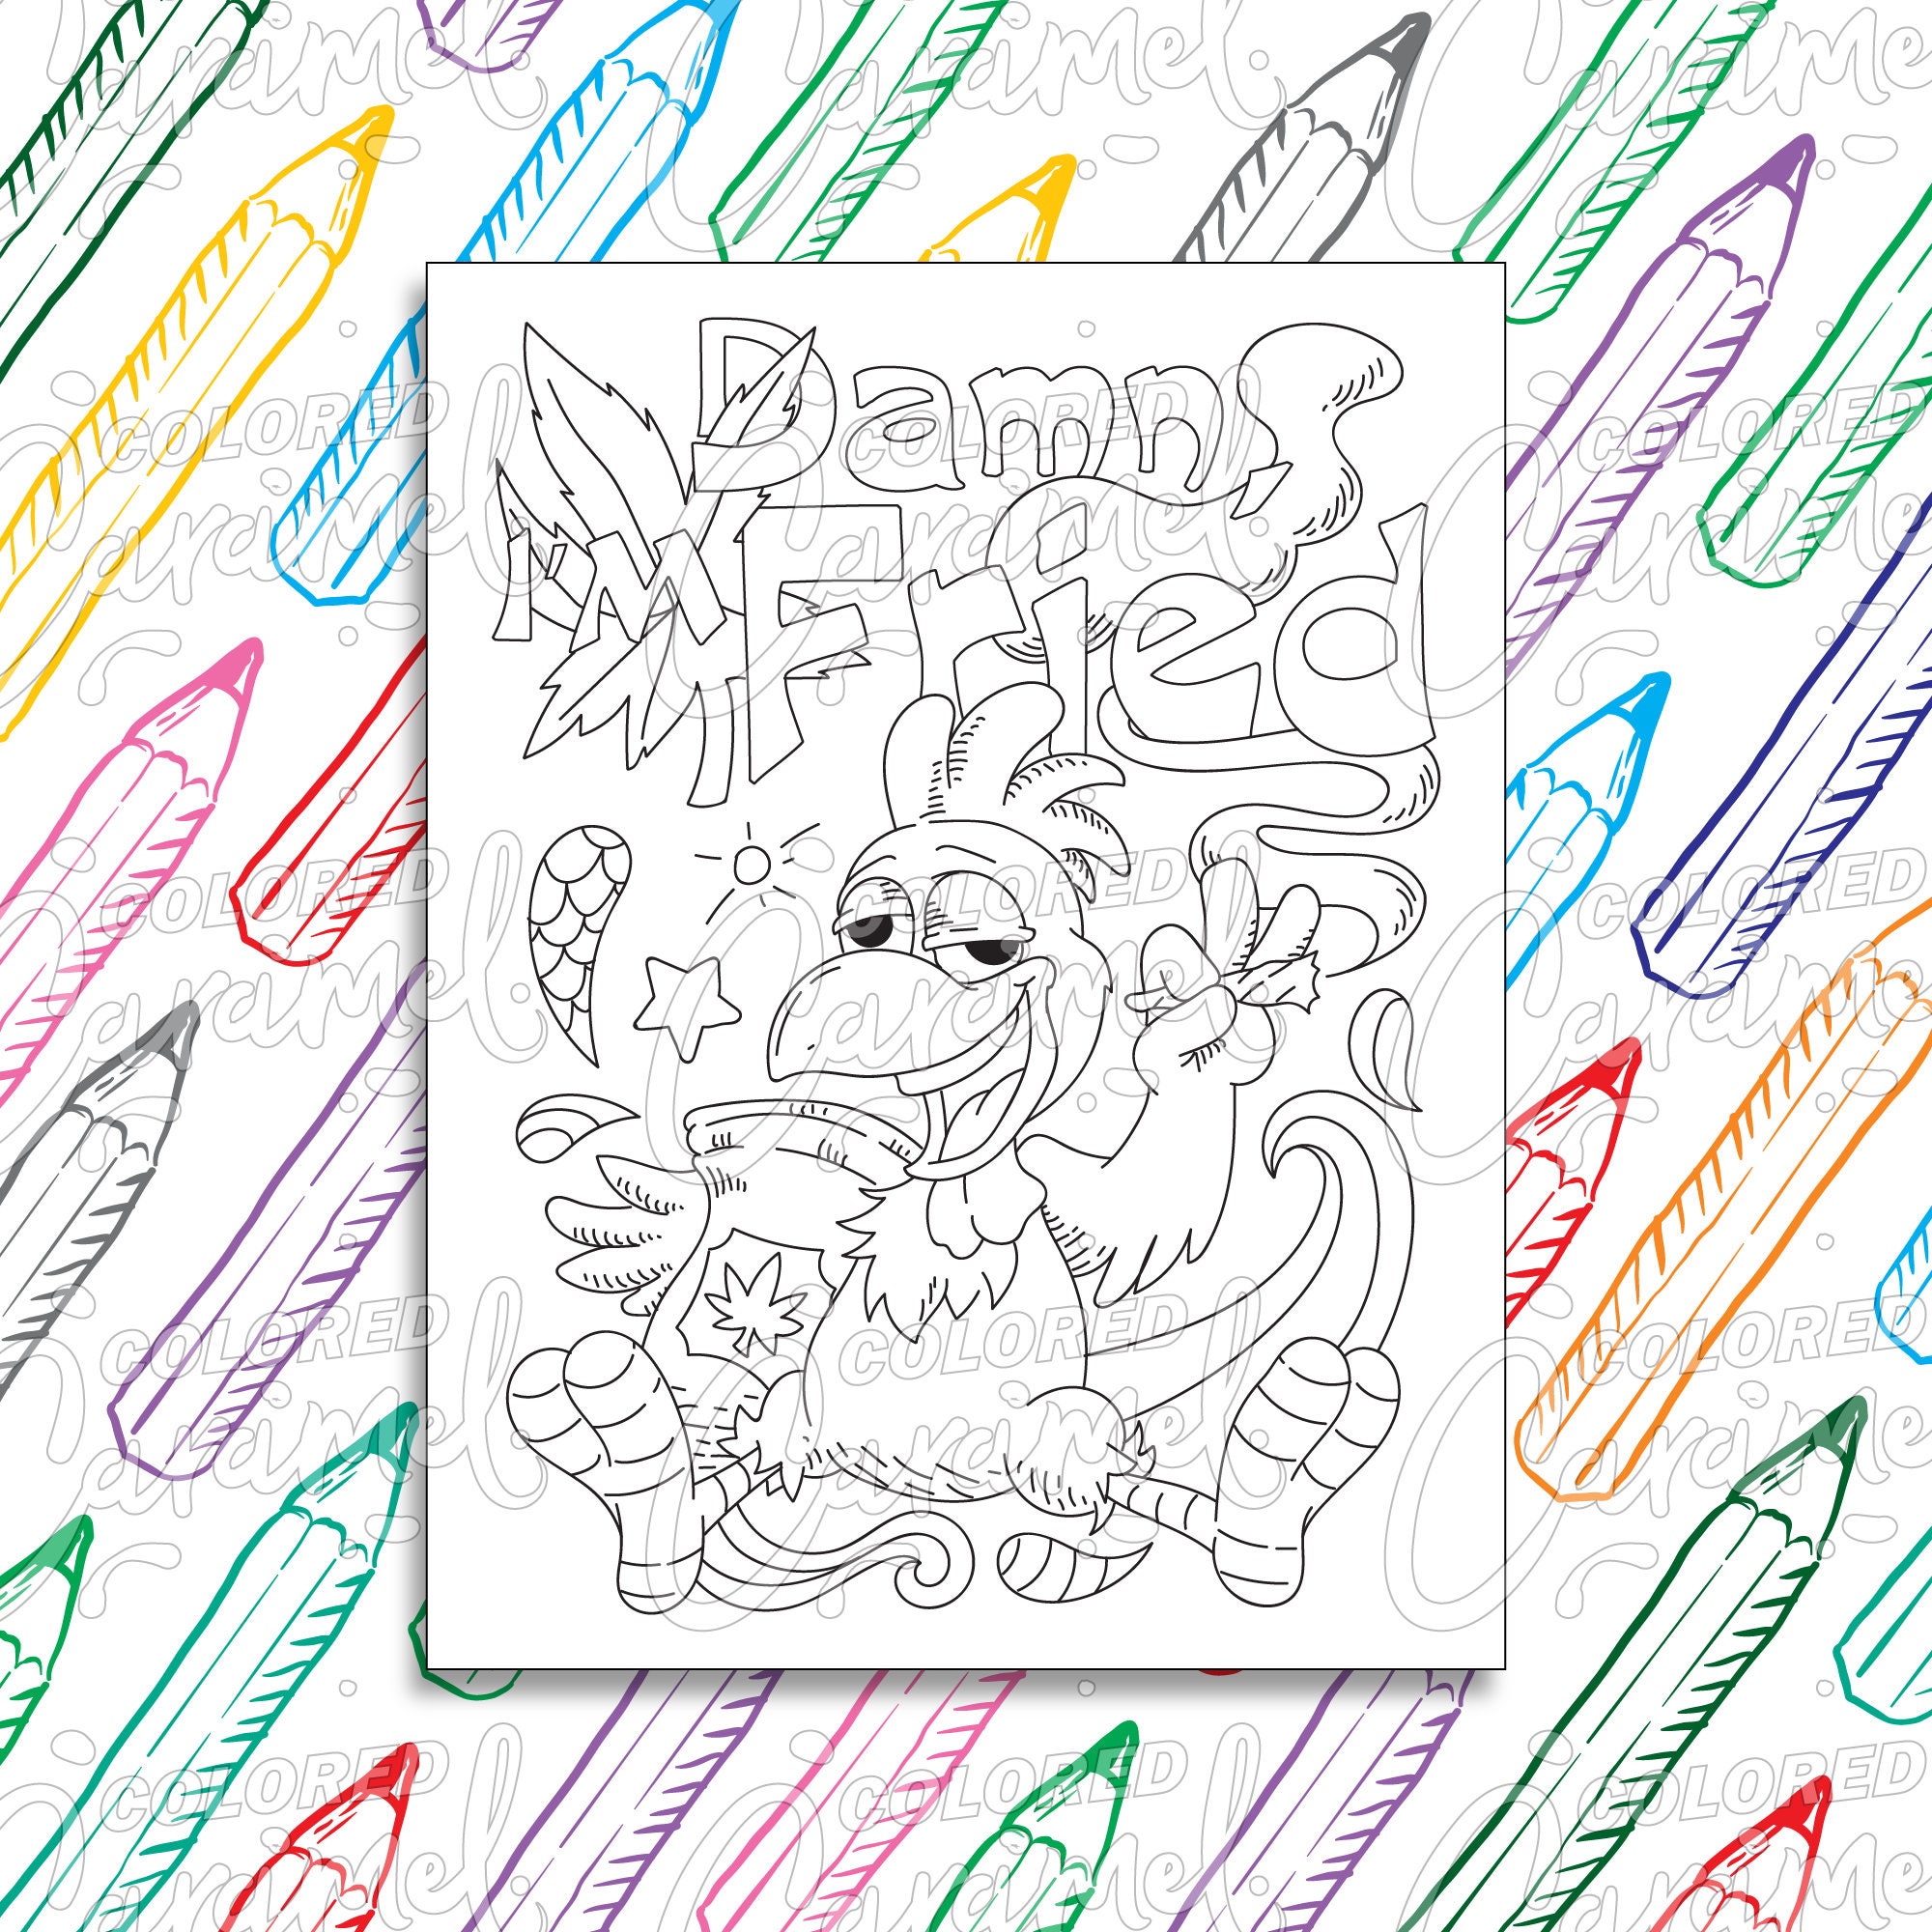 Stoner Coloring Page Digital Download PDF, Trippy, Funny and Cool Chicken Smoking Weed, Printable Psychedelic Drawing & Illustration